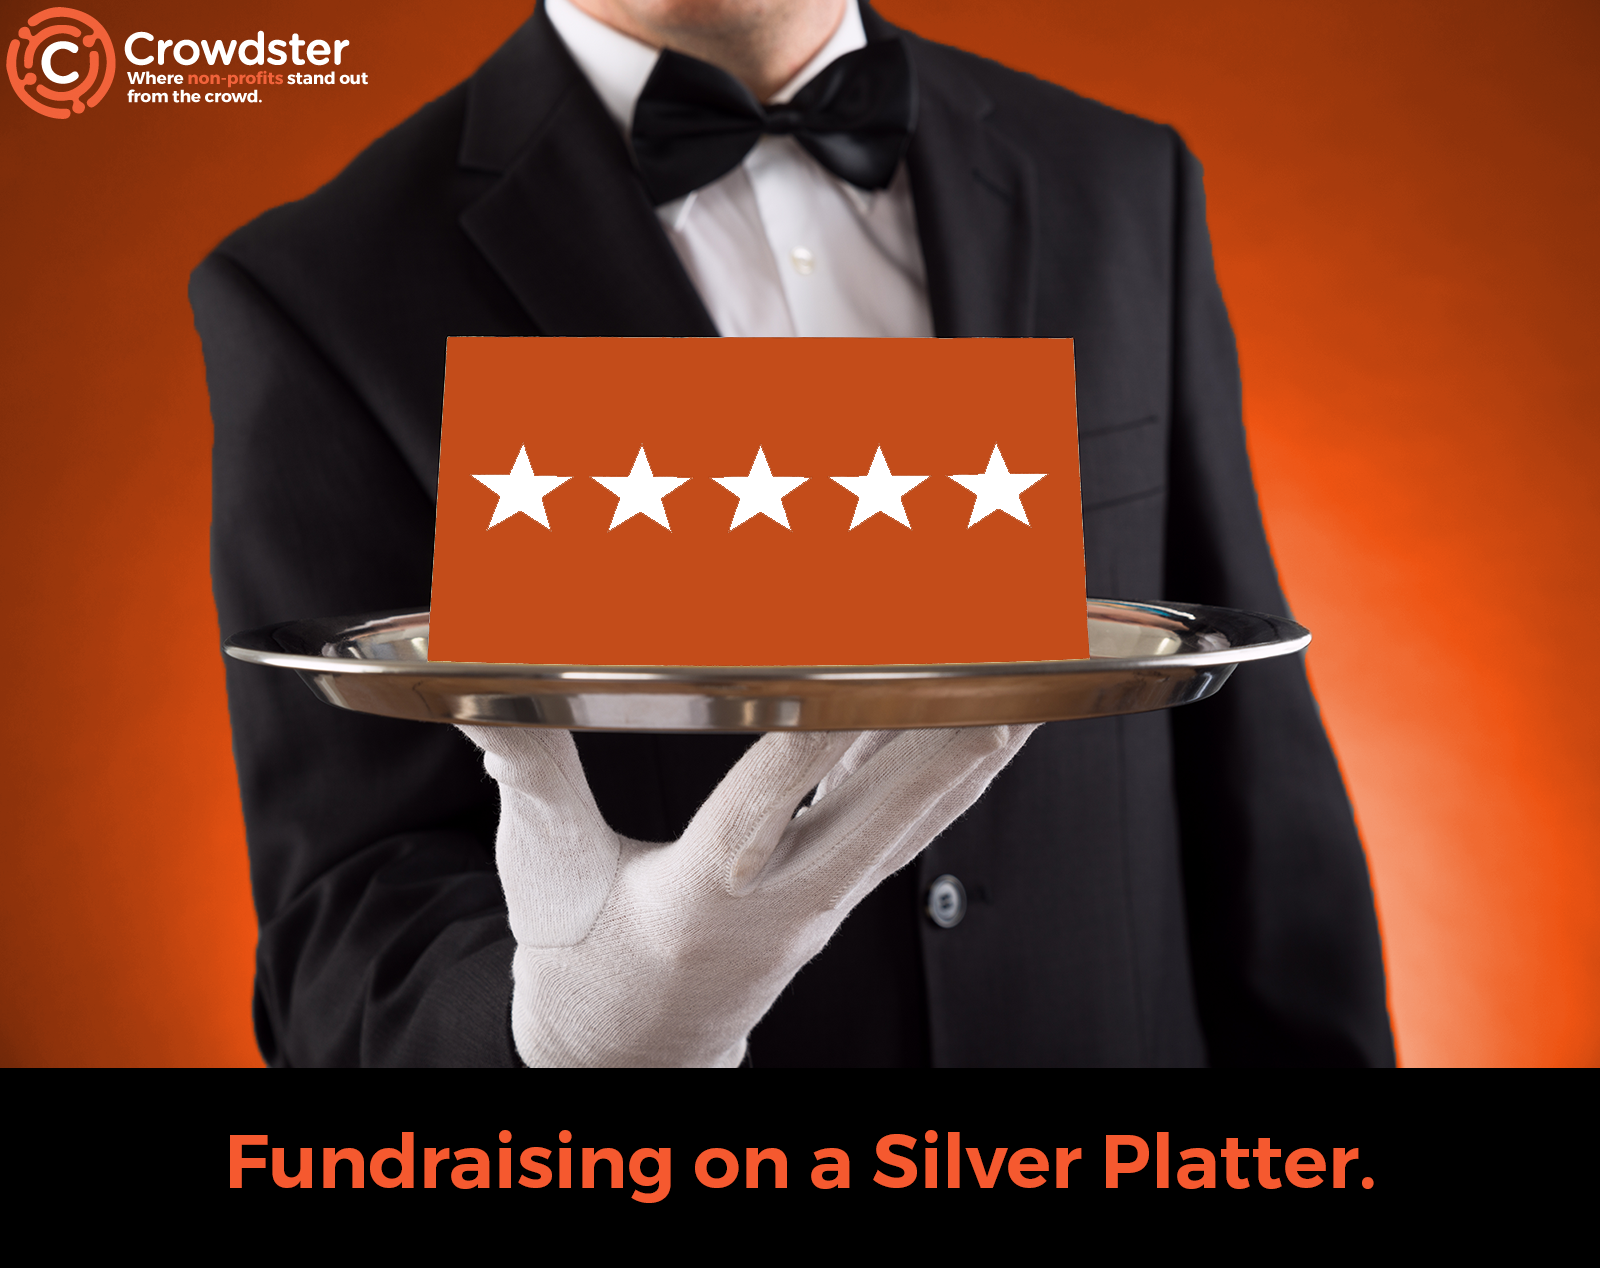 Crowdster understands how the responsibilities of fundraising can seem like a burden, so its created a service that takes the pressure off.